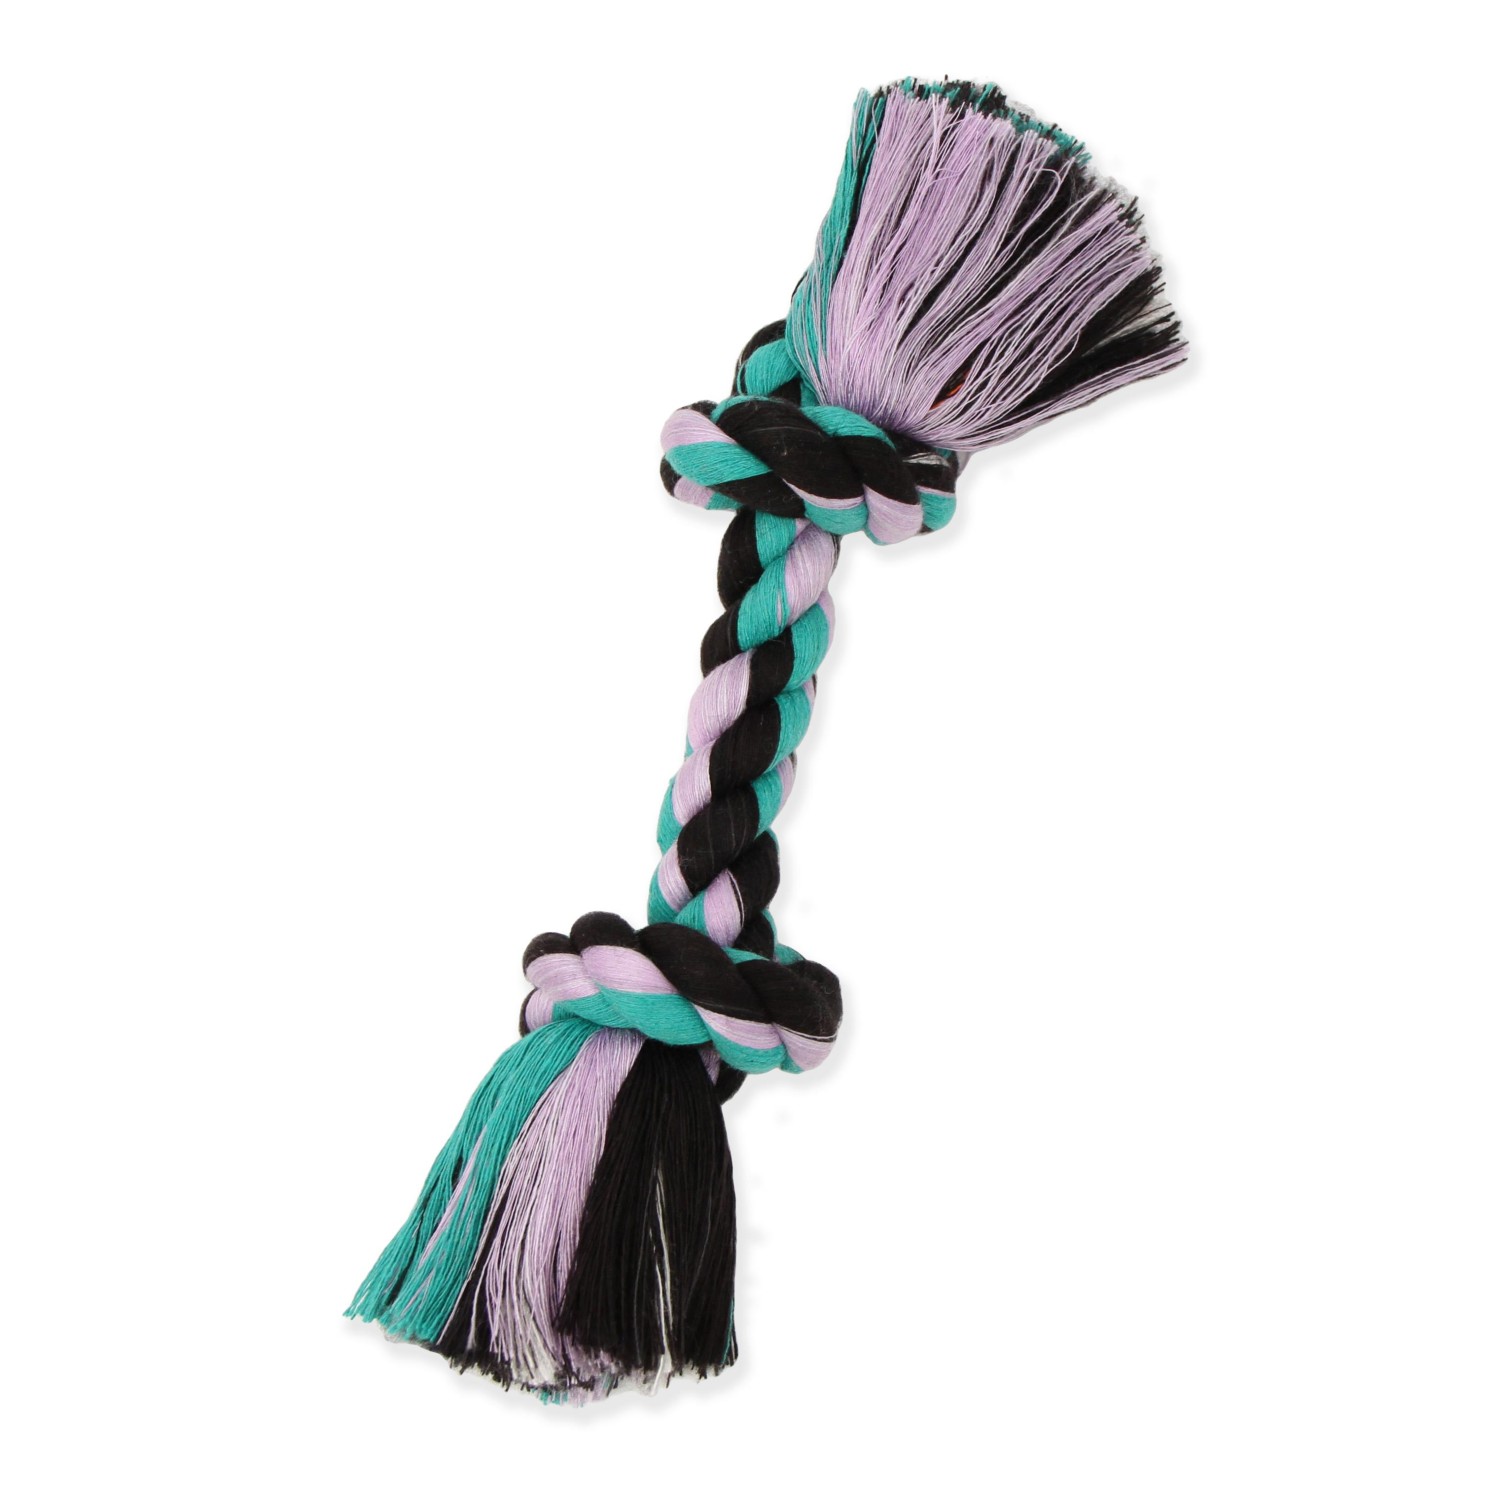 Mammoth Chew Rope Bone Dog Toy - Assorted Colors